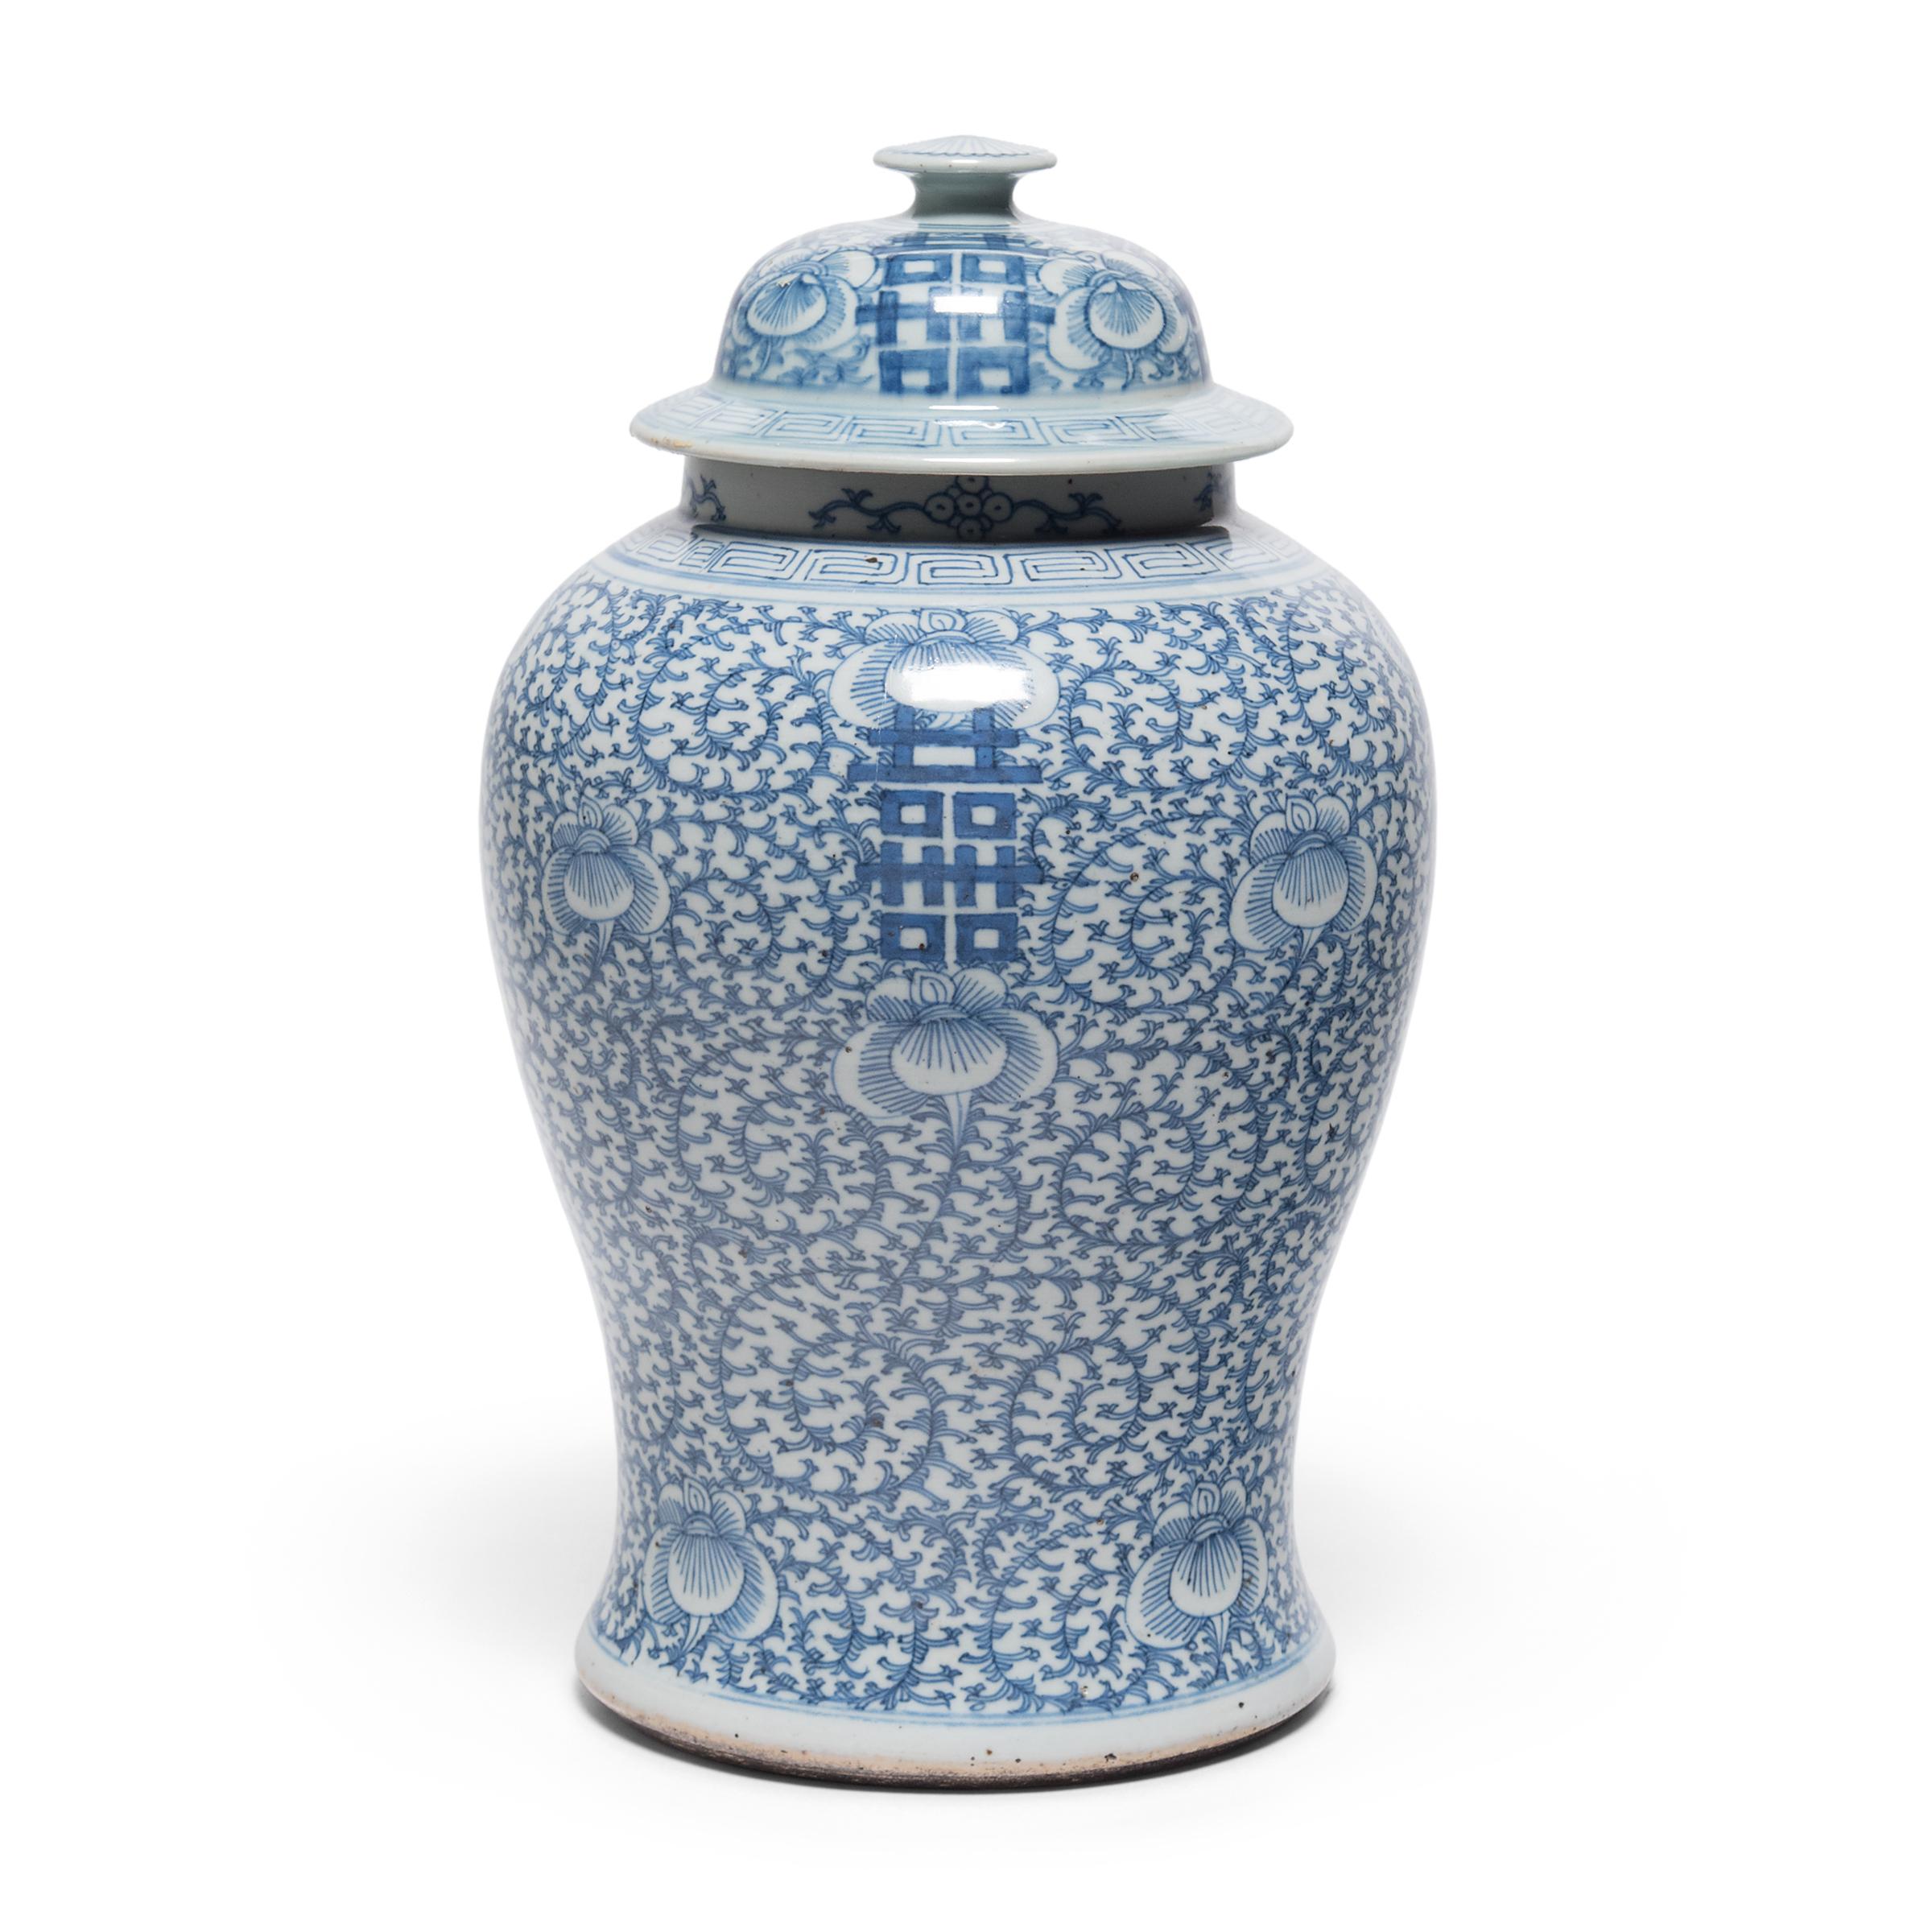 Glazed Chinese Blue and White Double Happiness Ginger Jar, circa 1850